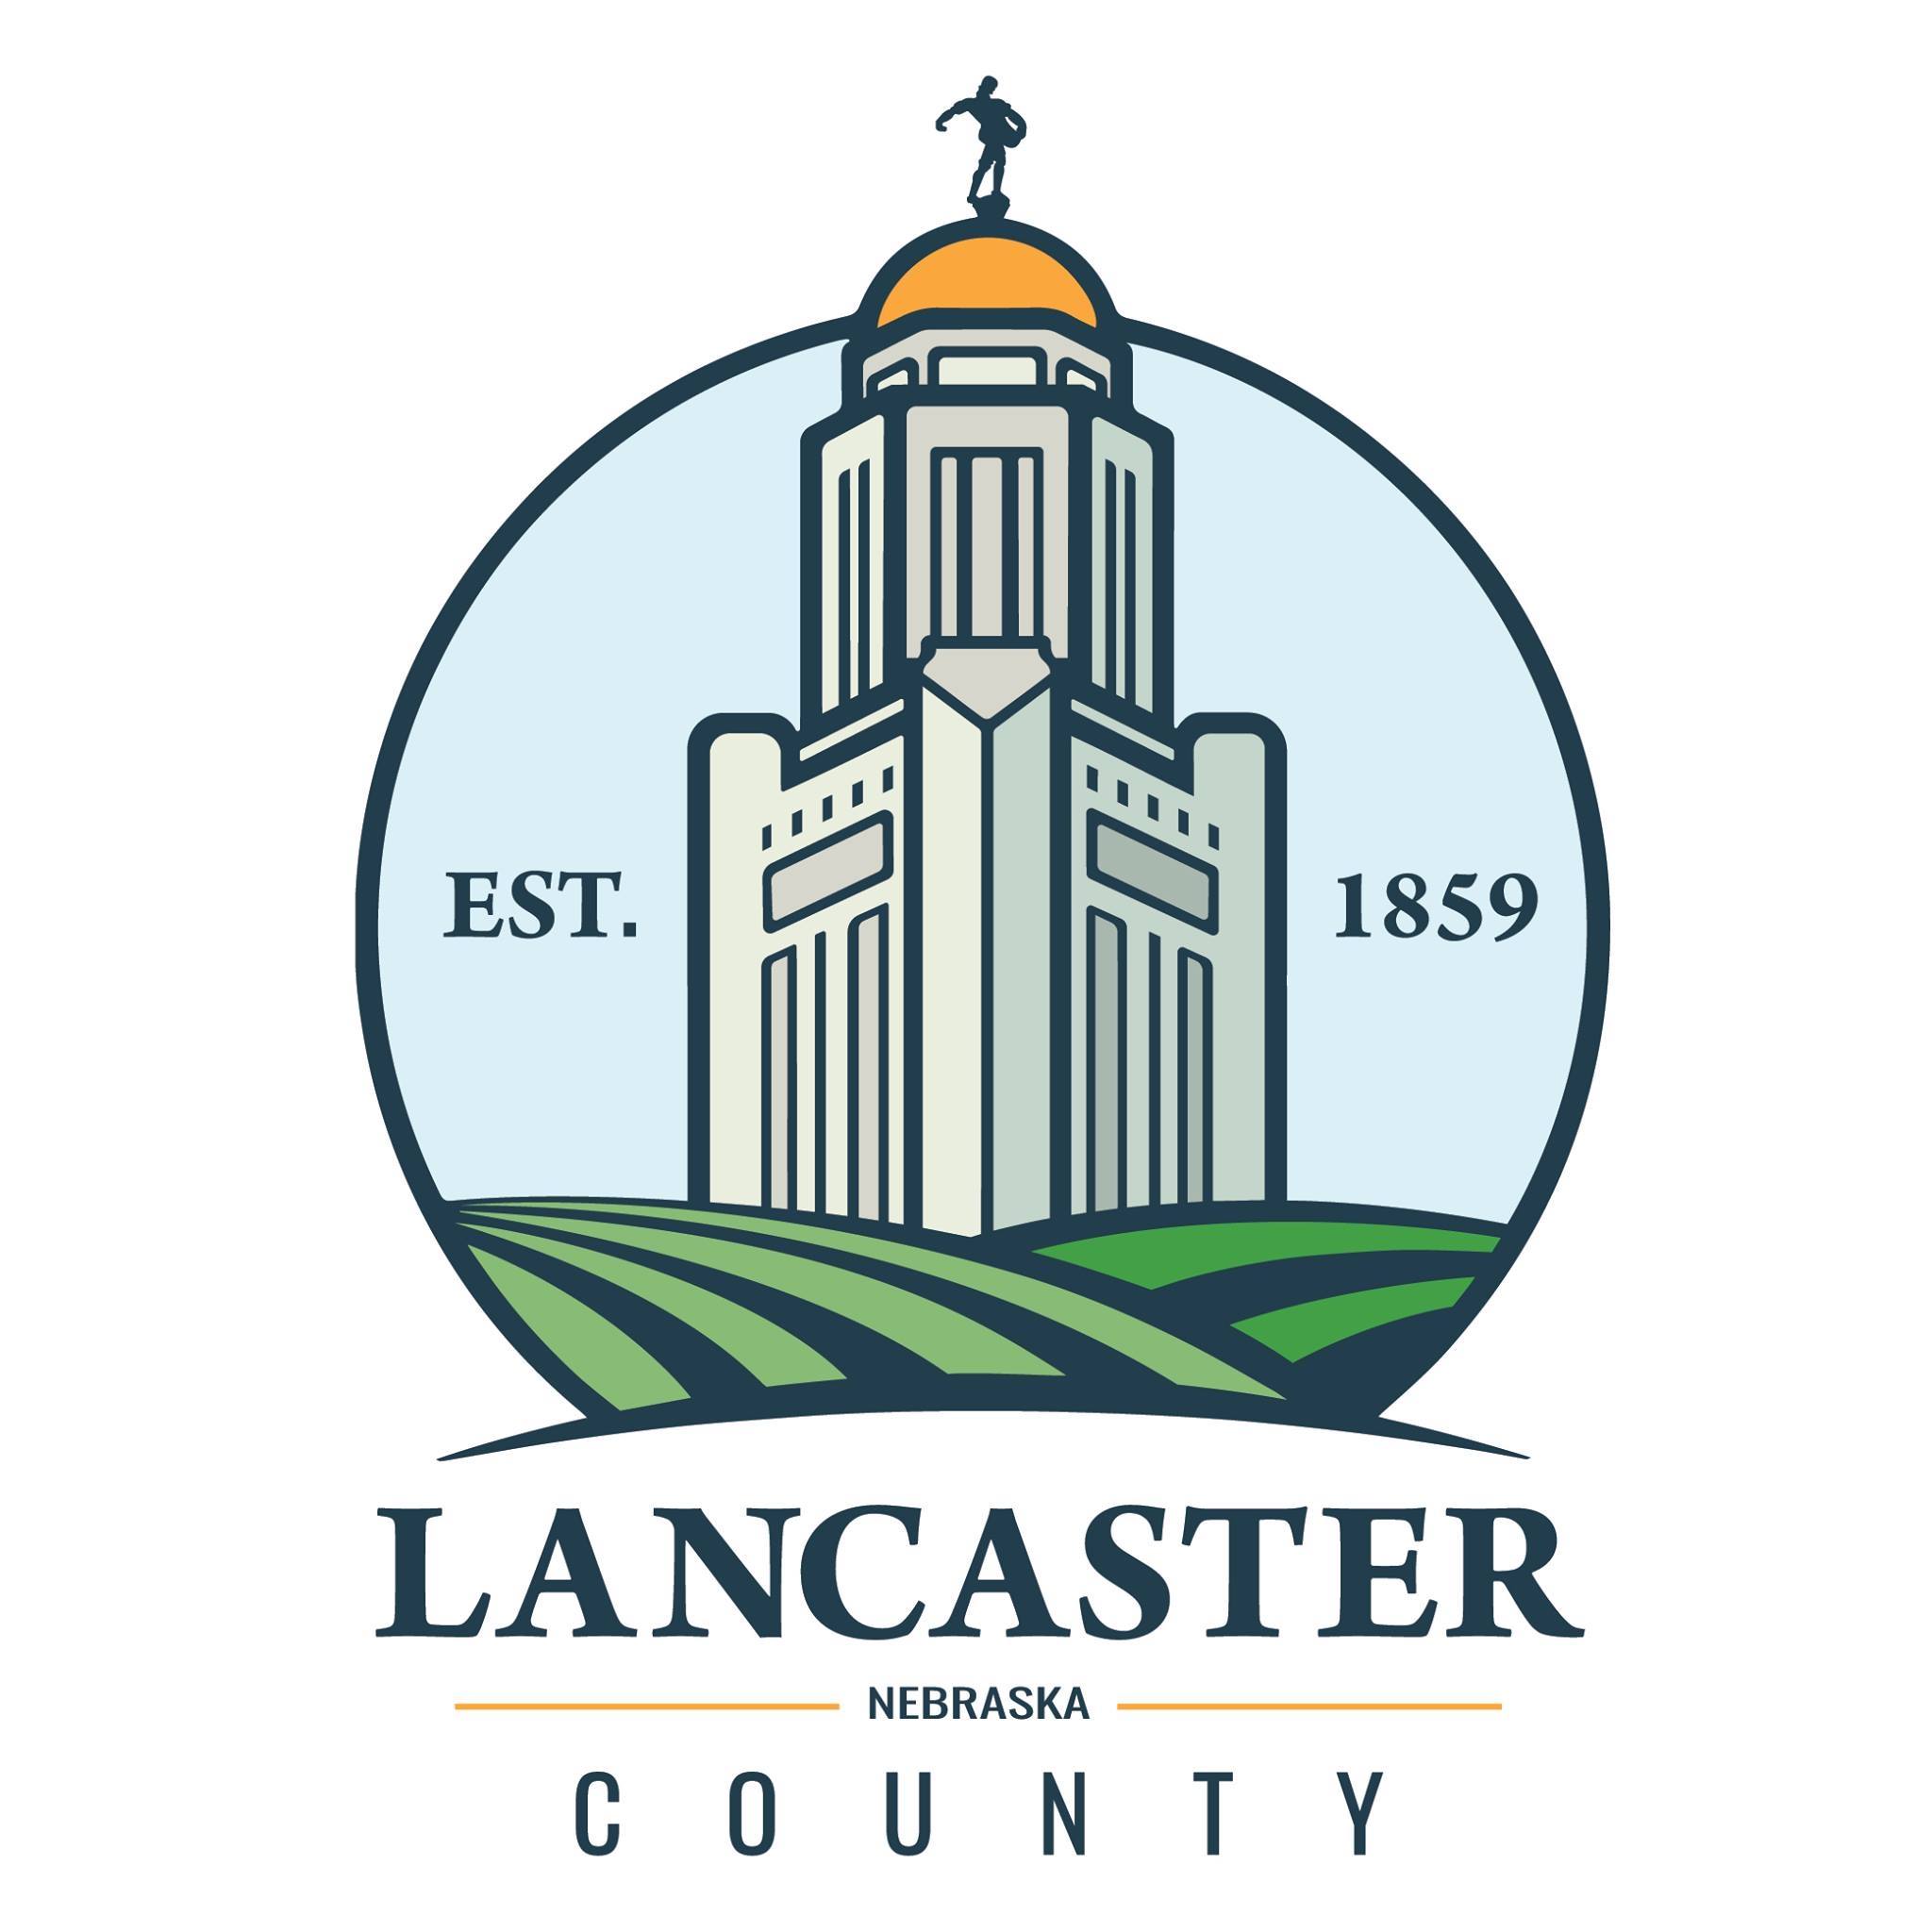 Business logo of Lancaster Weed Control Auth